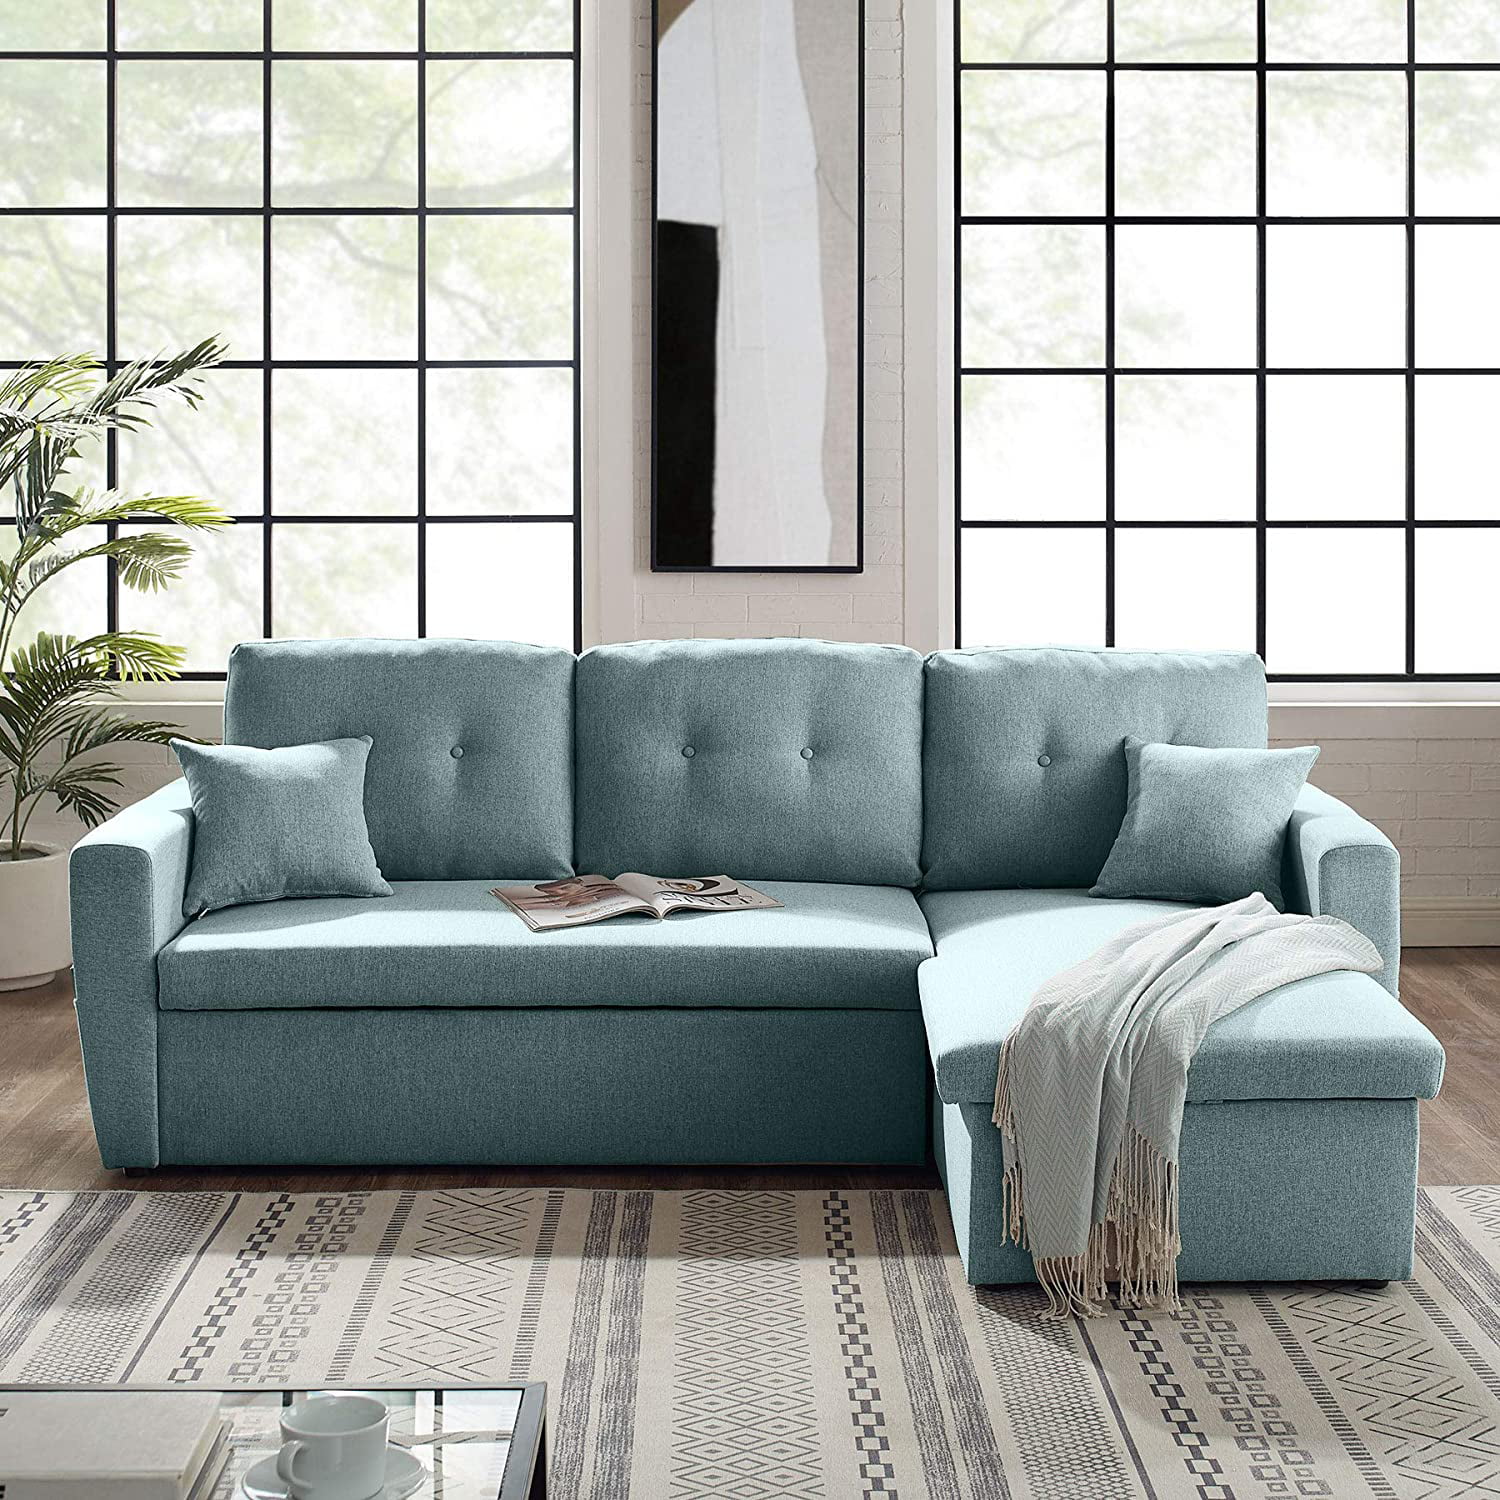 3 Seater Sofa Bed With Storage Tribesigns 866” Convertible Sectional